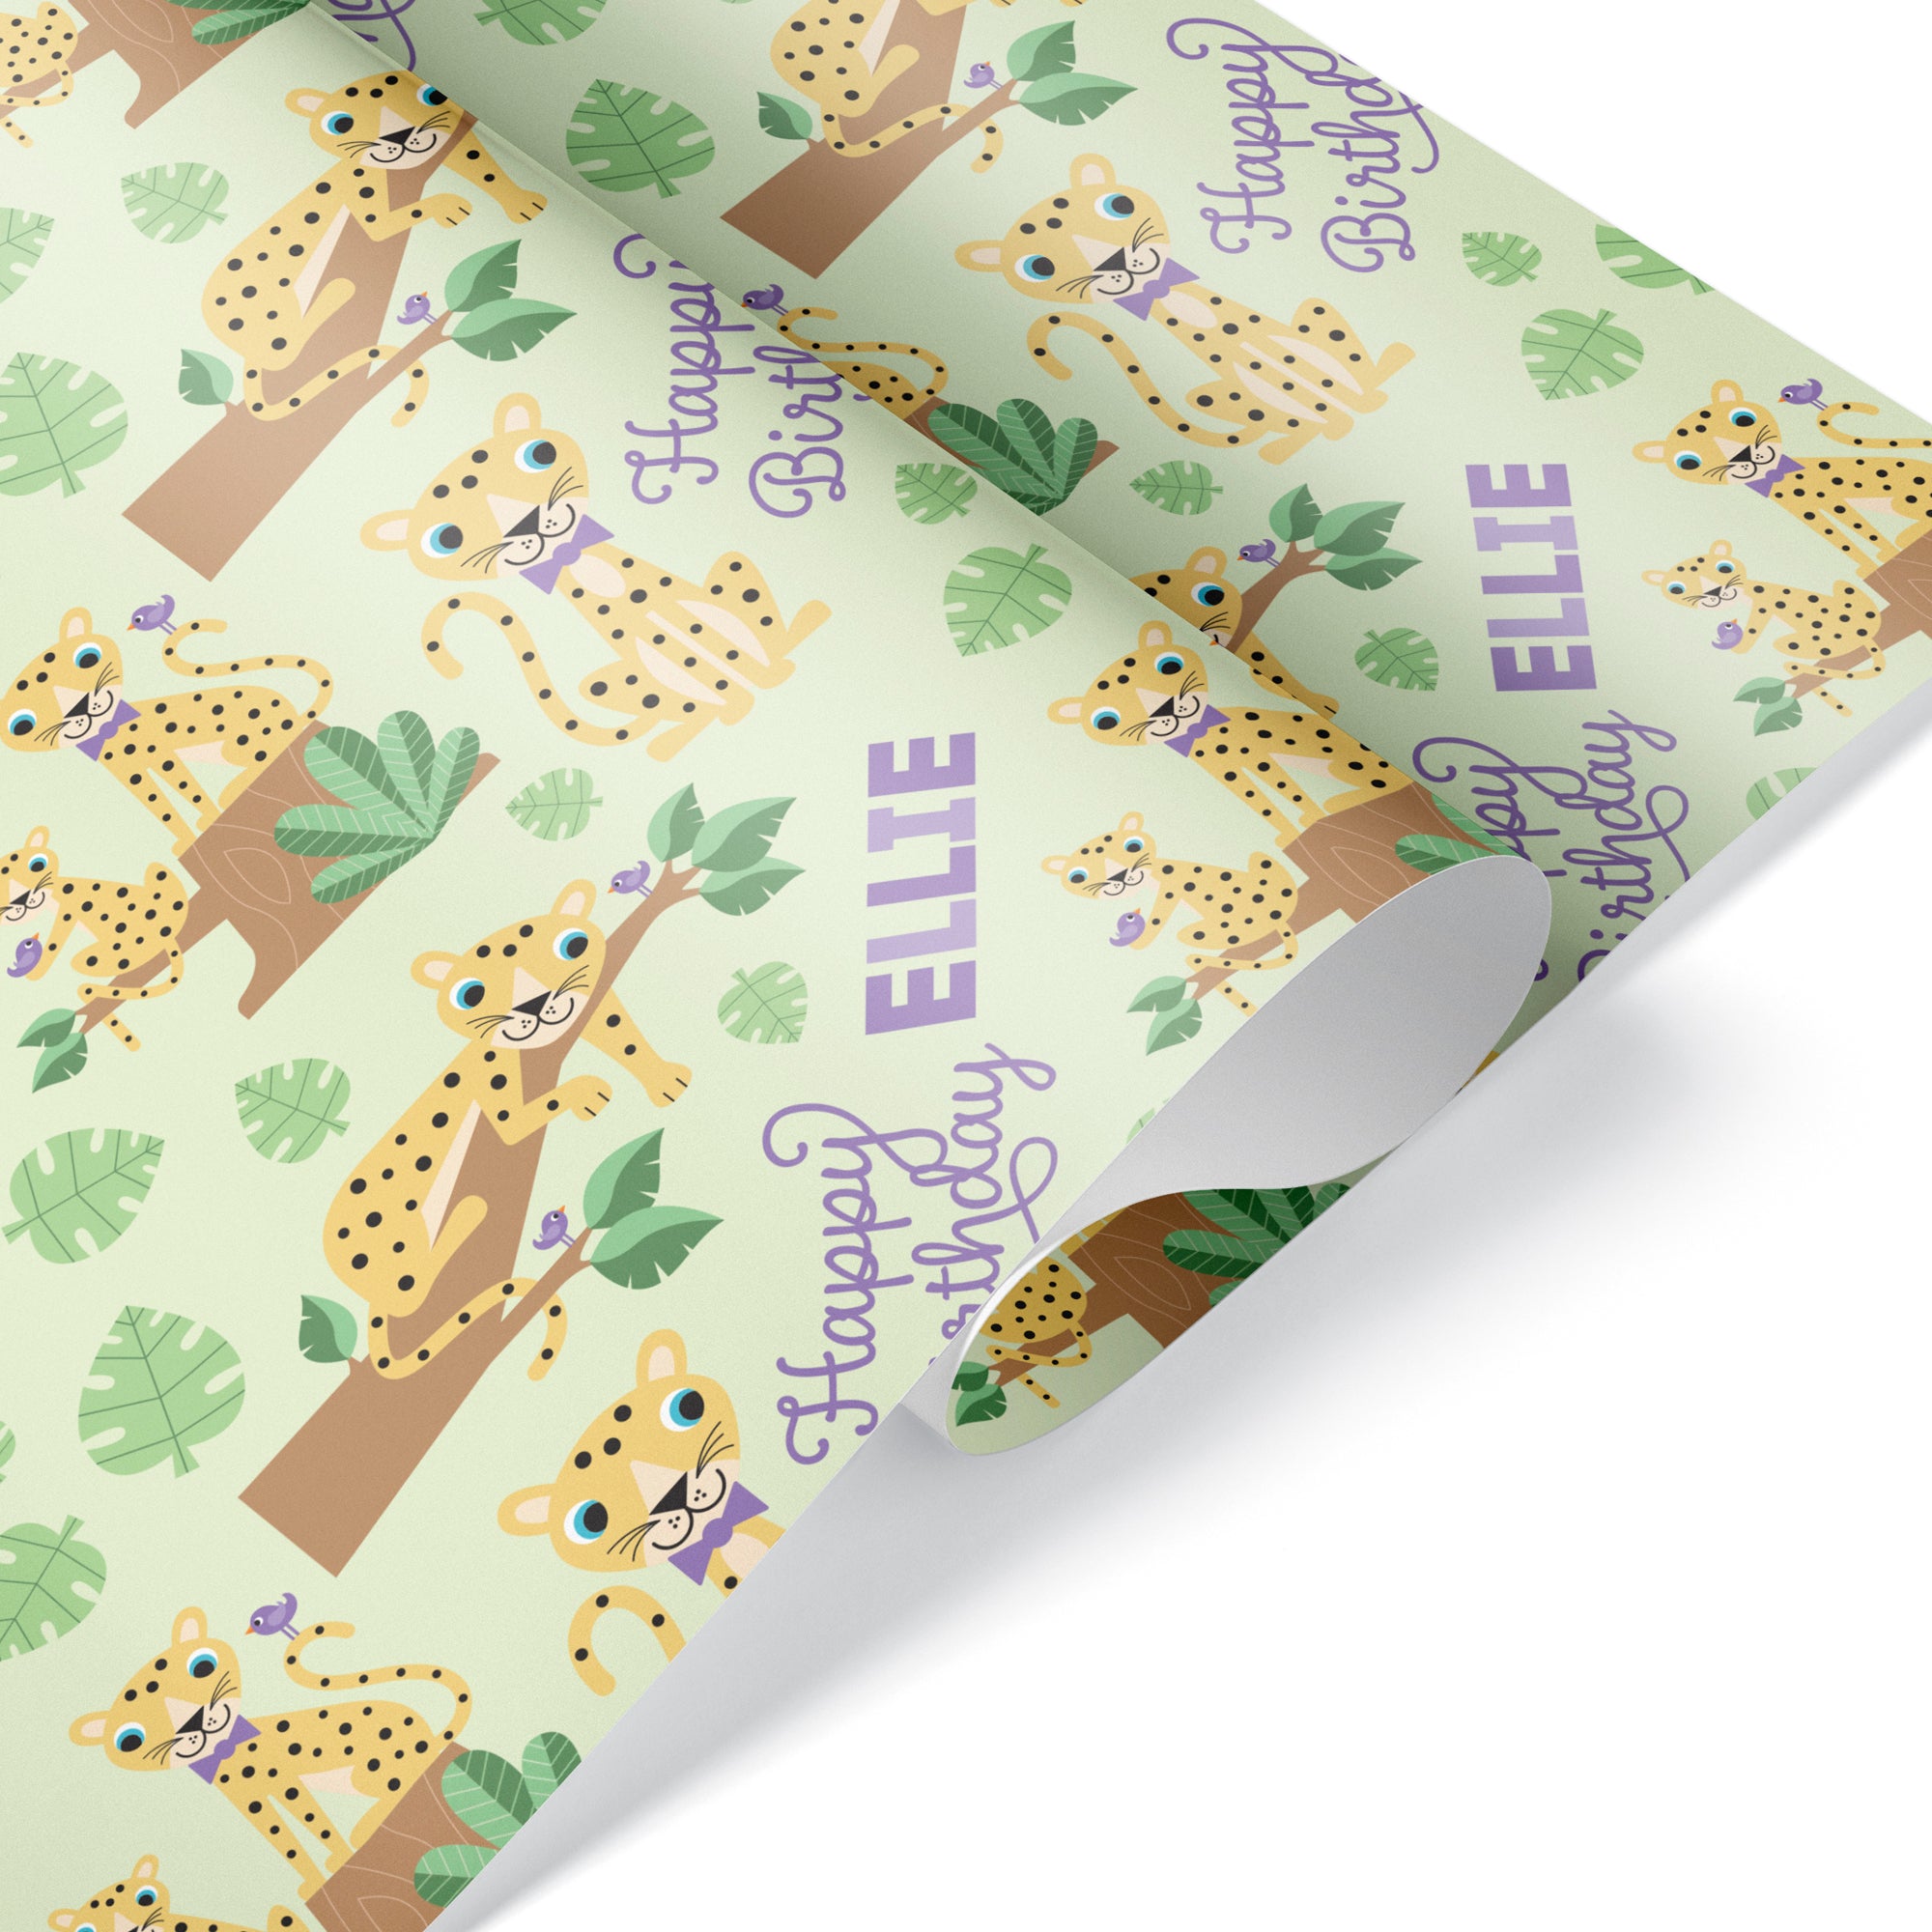 CENTRAL 23 Safari Wrapping Paper - 6 Sheets Beige Gift Wrap - Elephant  Cheetah Zebra - Cute Animal Print Wrapping Paper - Comes With Fun Stickers